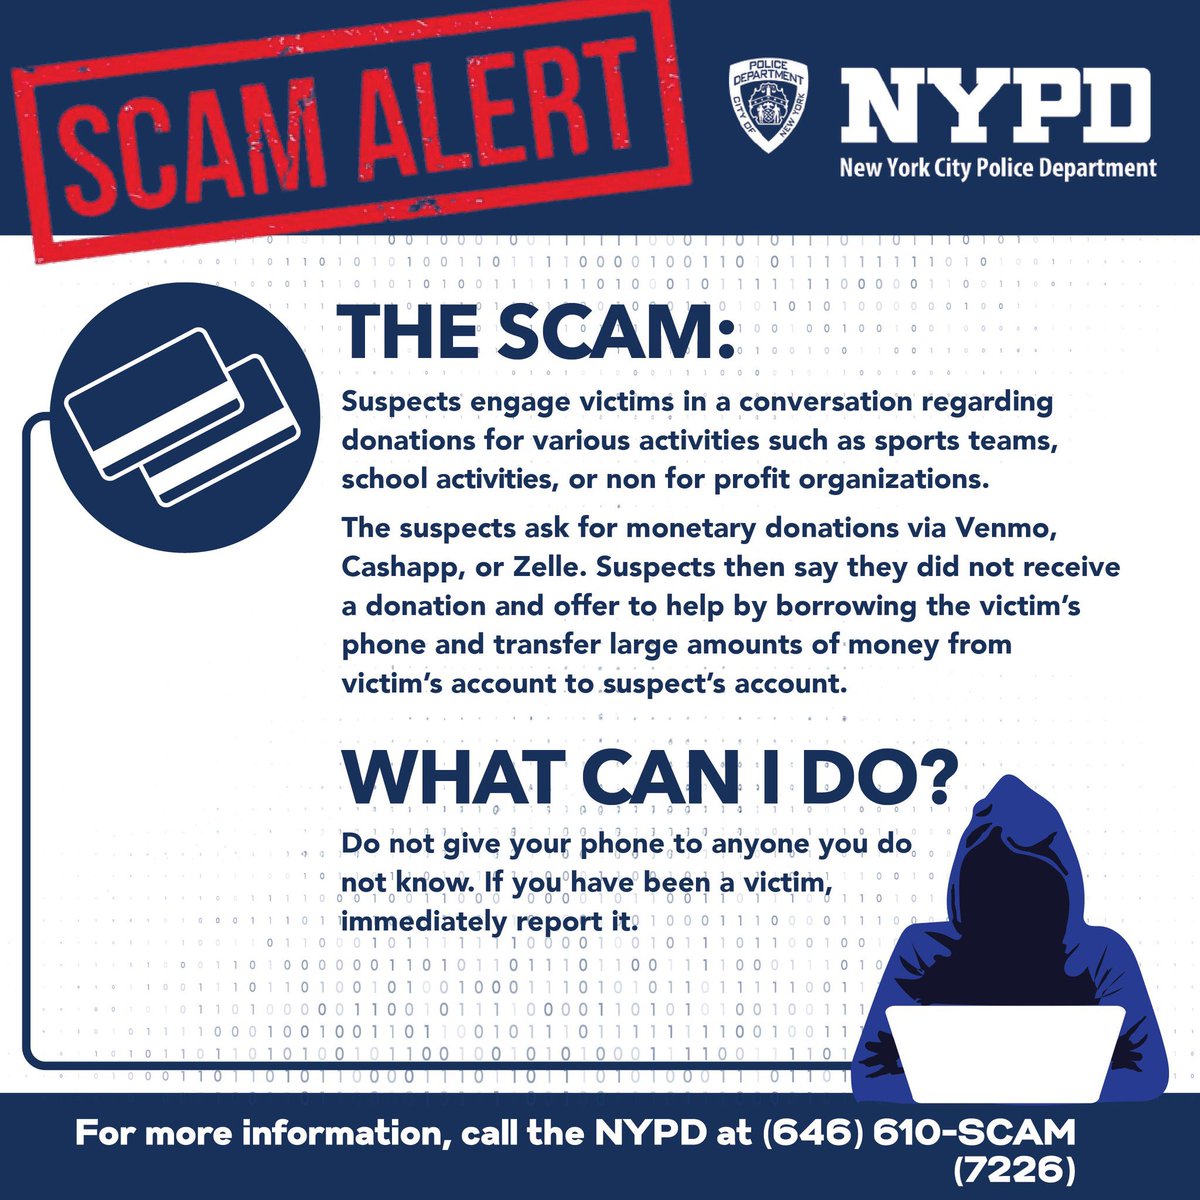 ⚠️Scam Alert⚠️ Be aware of donation scams asking money for sports teams, activities, or non for profit organizations using Venmo, Cash App, or Zelle. Never offer your phone to anyone you don't know❗️